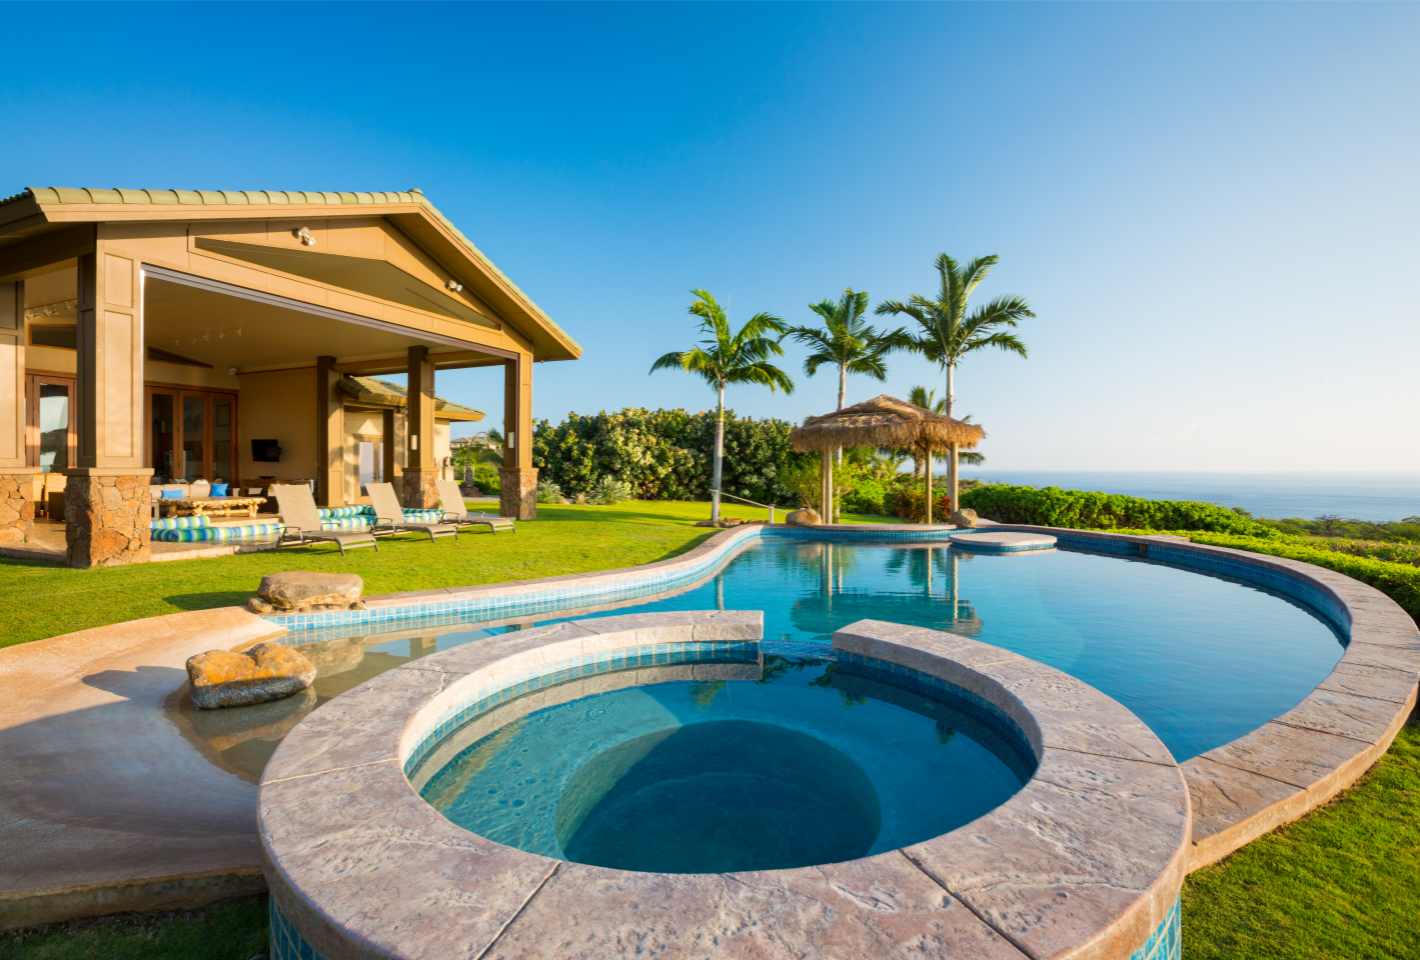 Tropical home with a beautiful pool